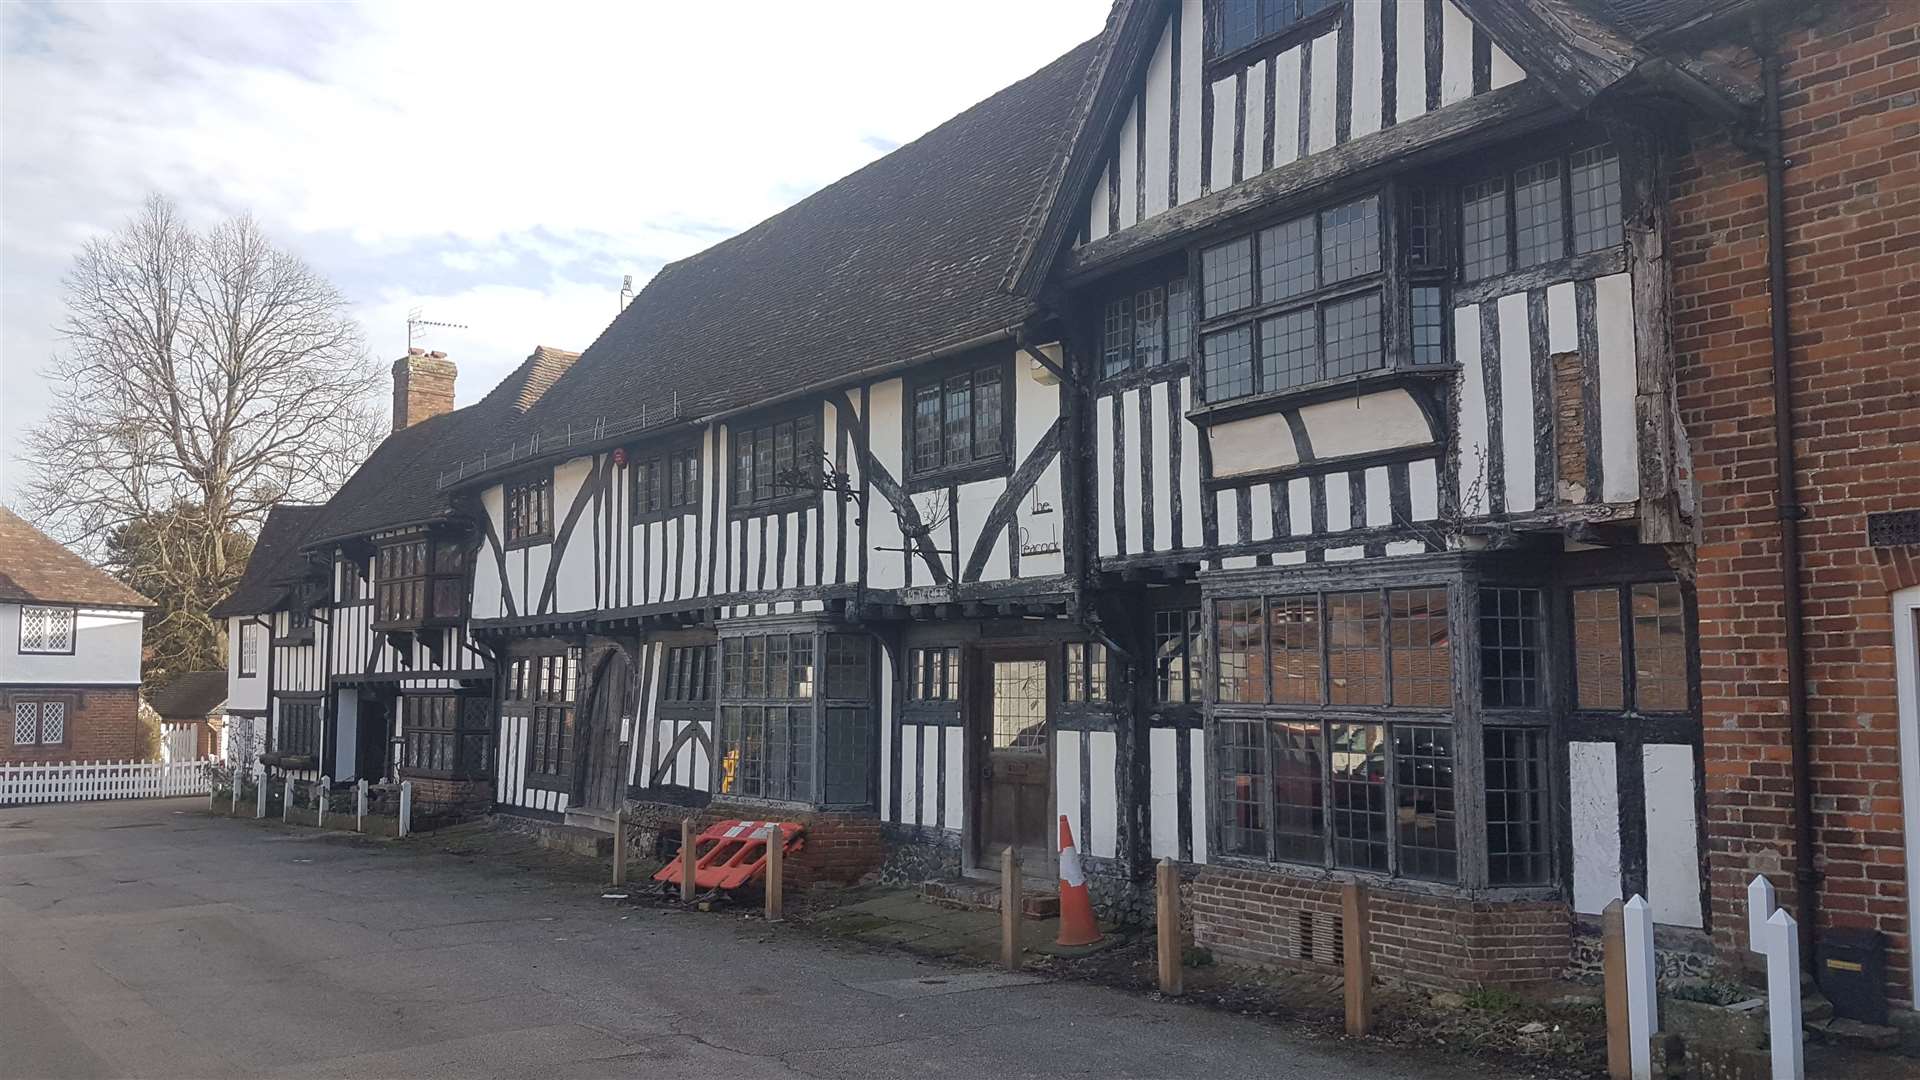 The Tudor Peacock is set to open in Chilham village square